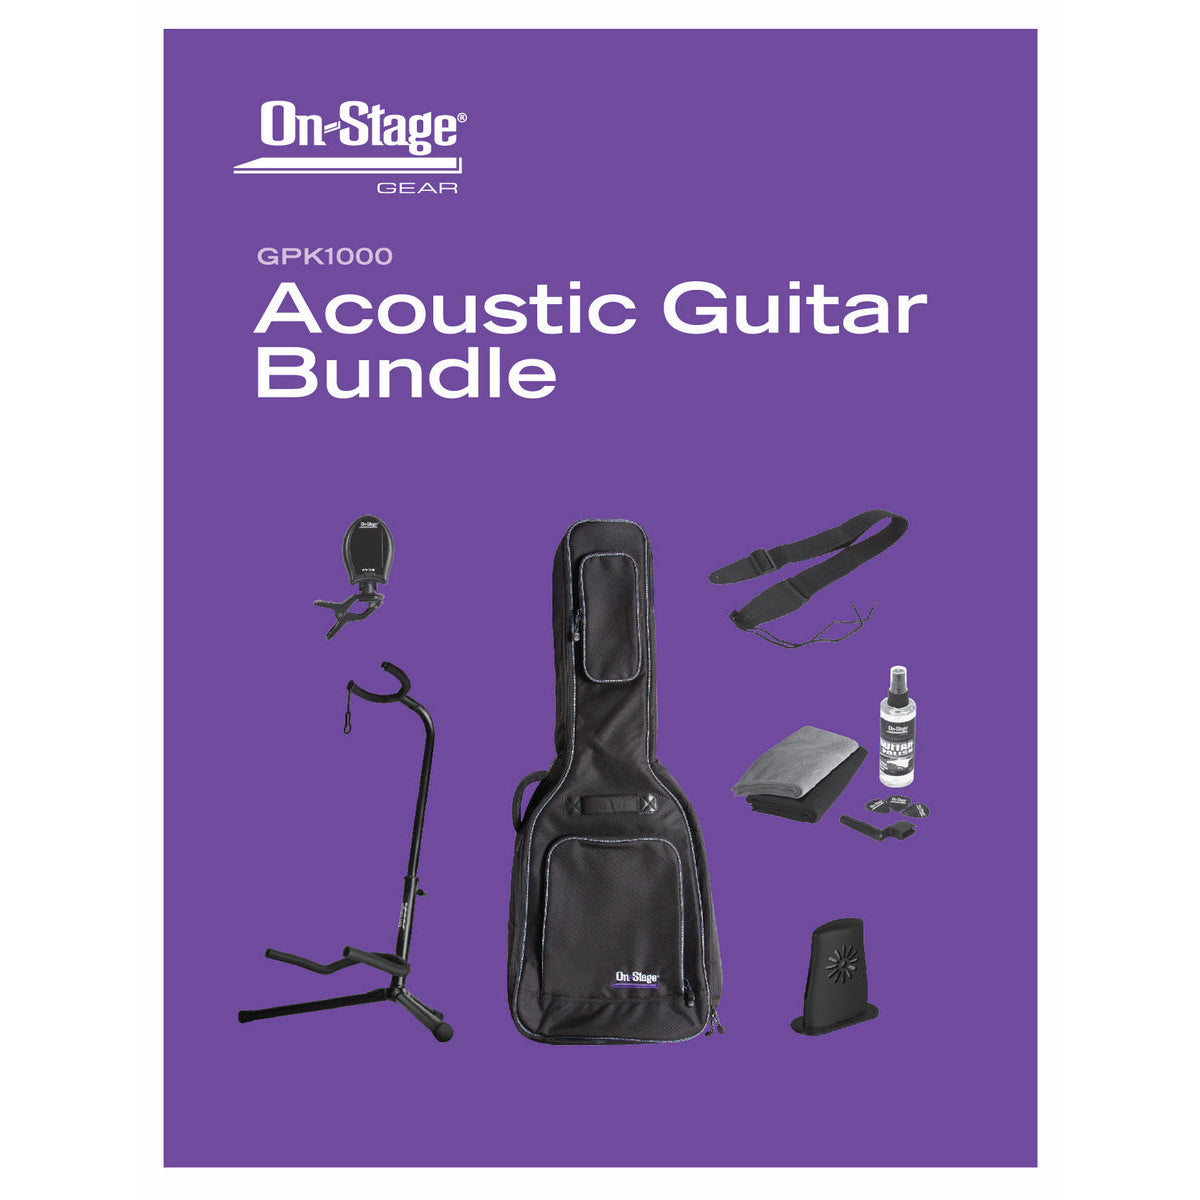 Acoustic Guitar Case, Stand, Tuner and more Bundle